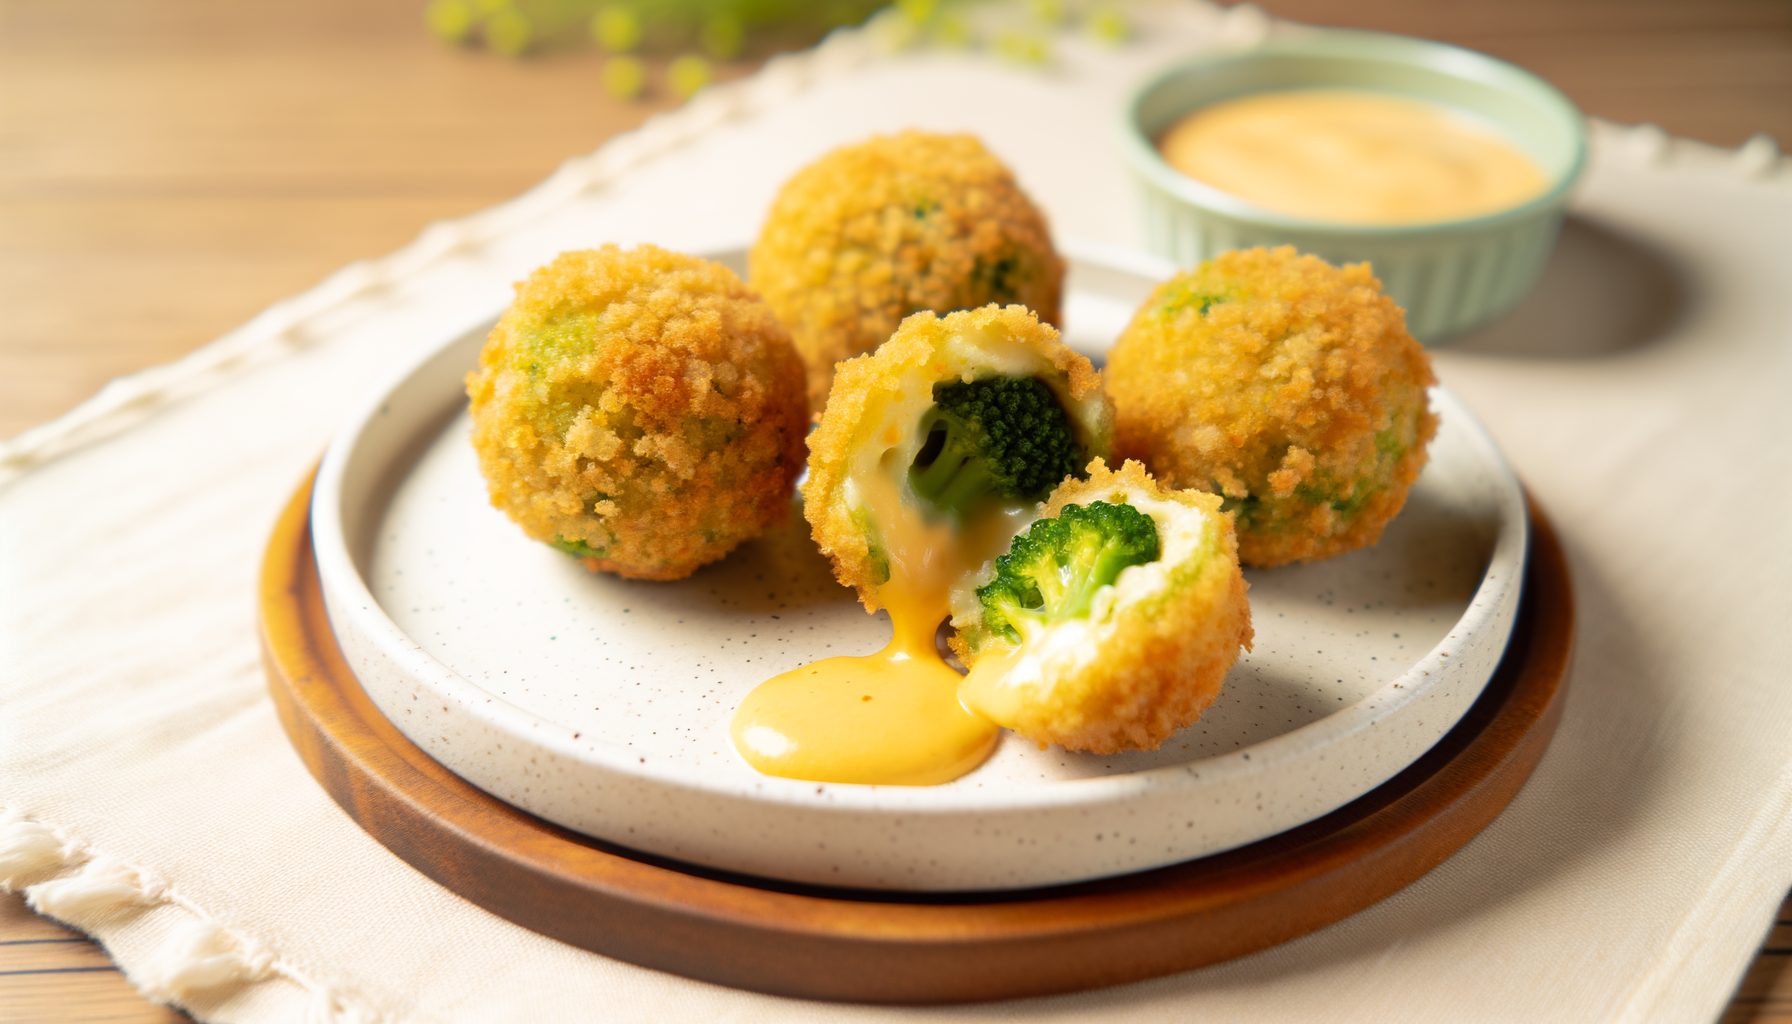 Golden-brown broccoli cheese balls on a white platter with dipping sauce and rustic table setting.